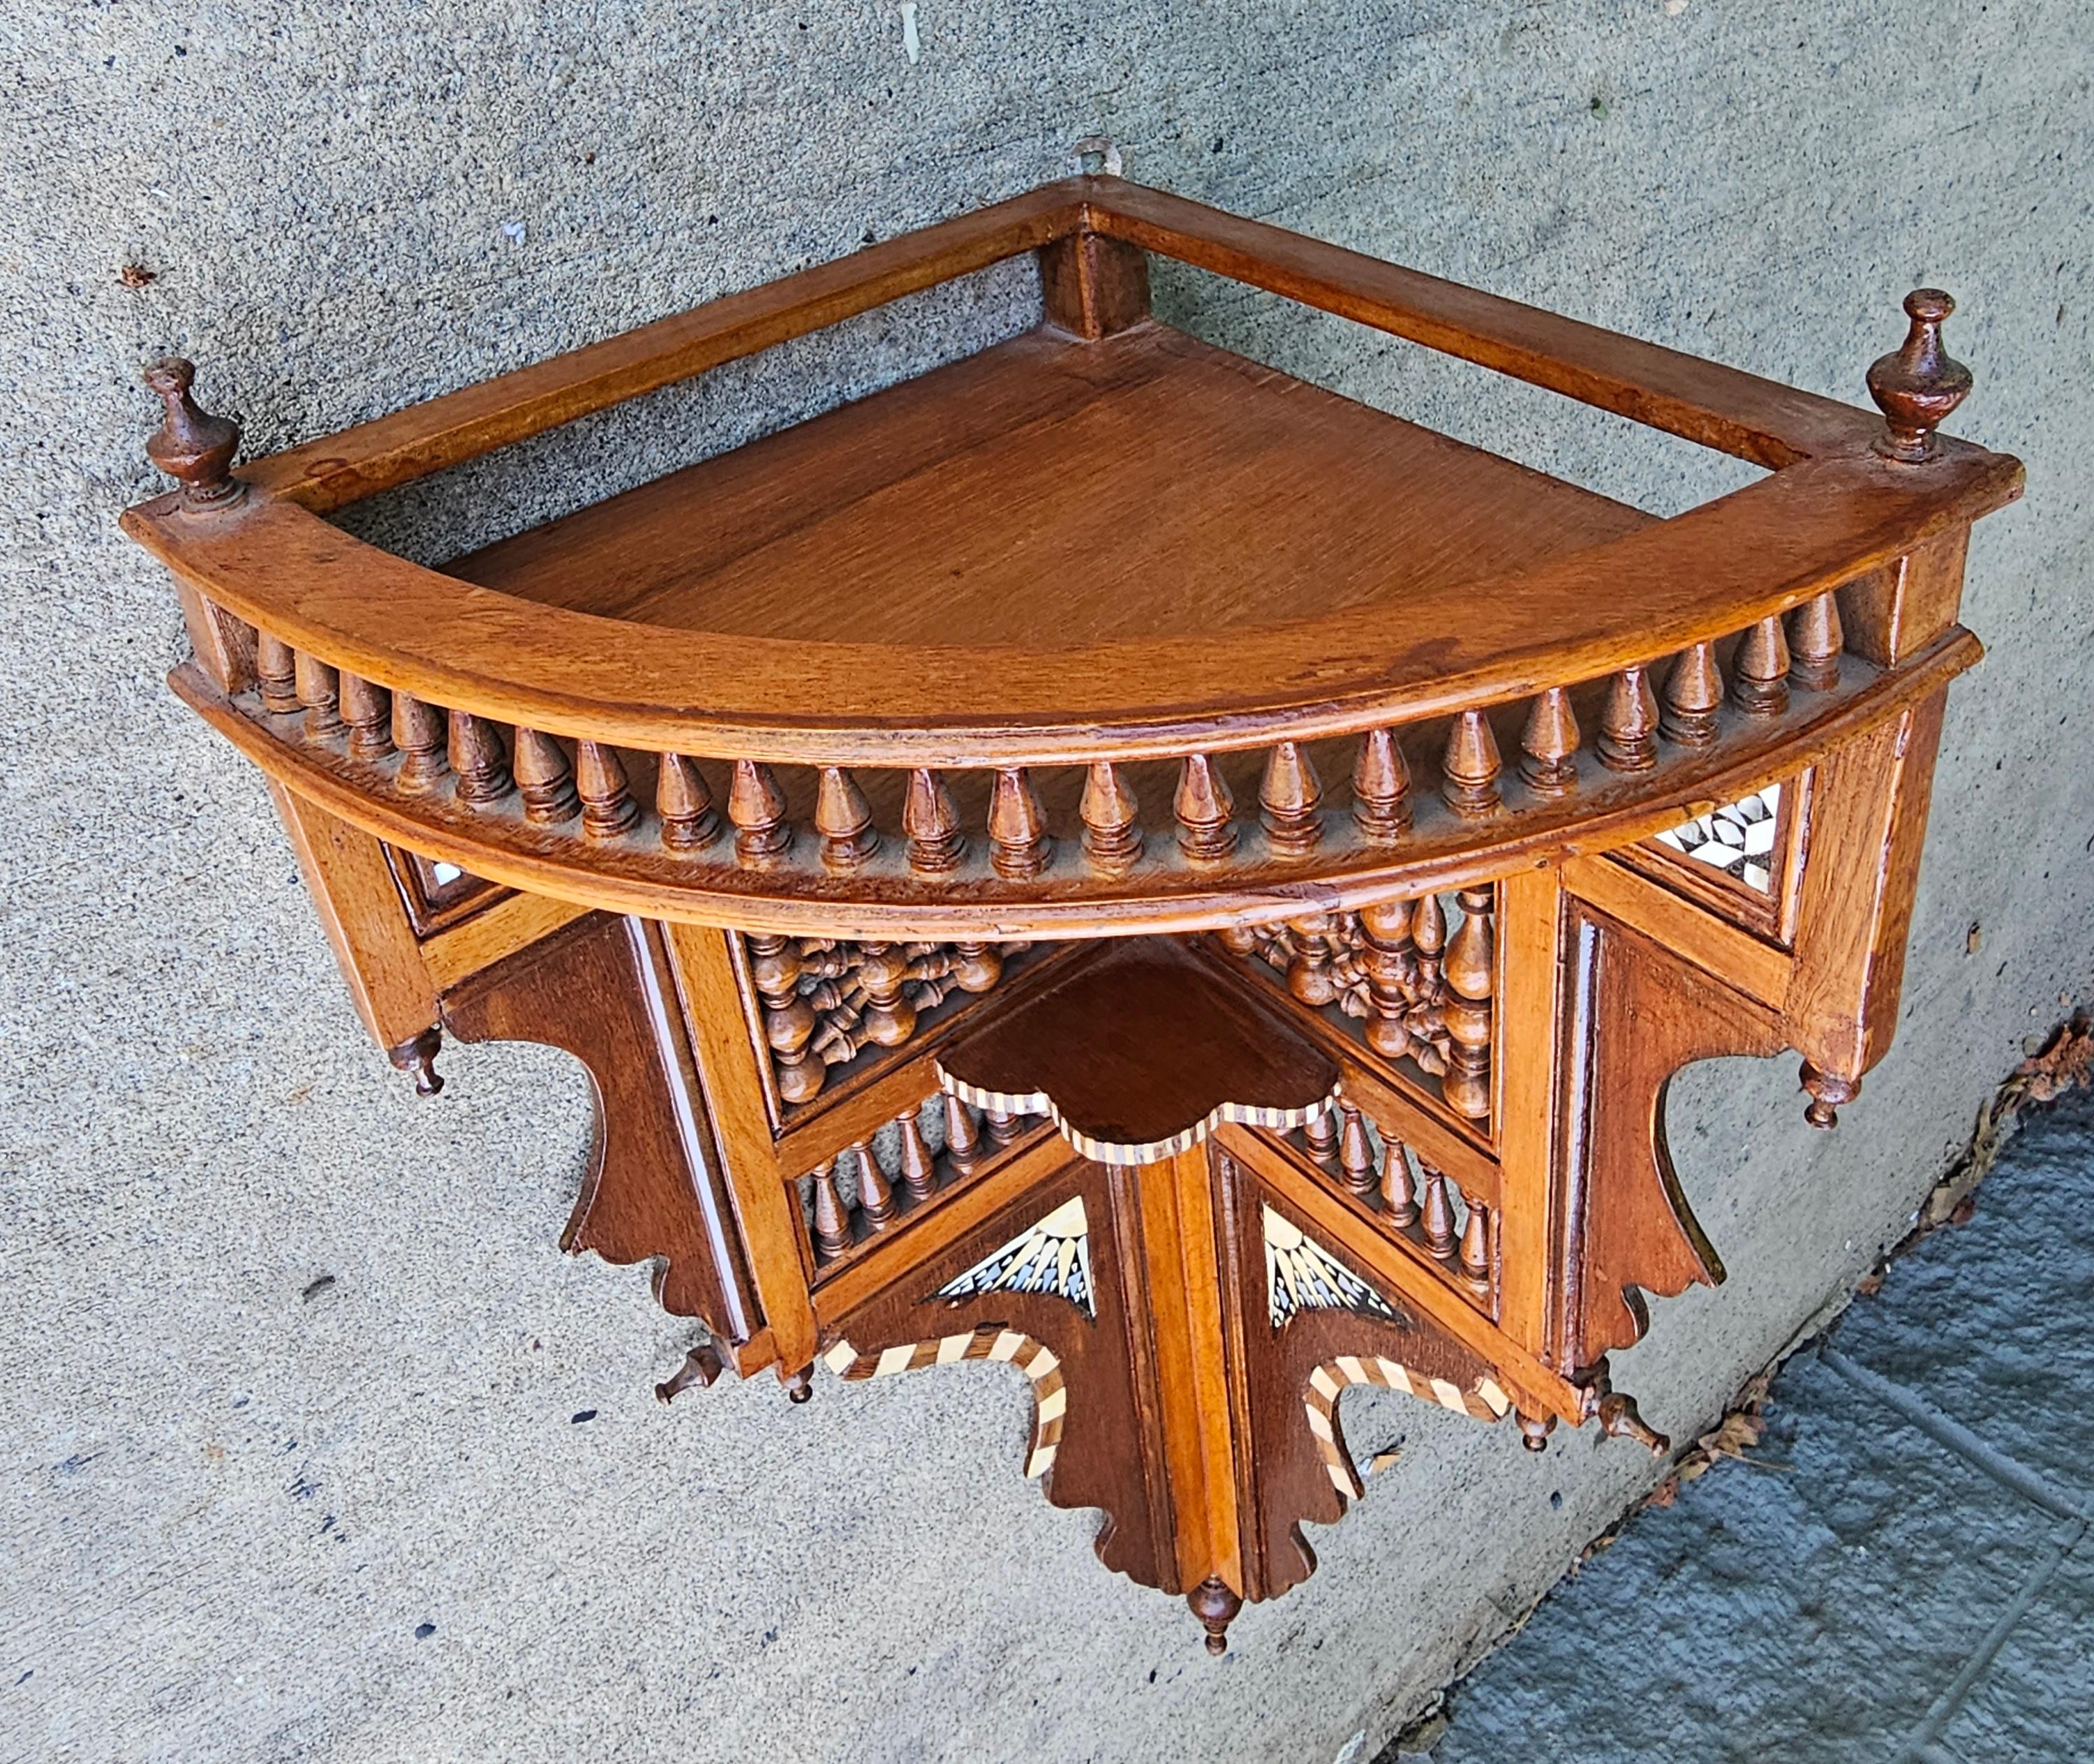 Syrian Bone And Ebony Wood Inlaid Mahogany Corner Wall Shelf In Good Condition For Sale In Germantown, MD